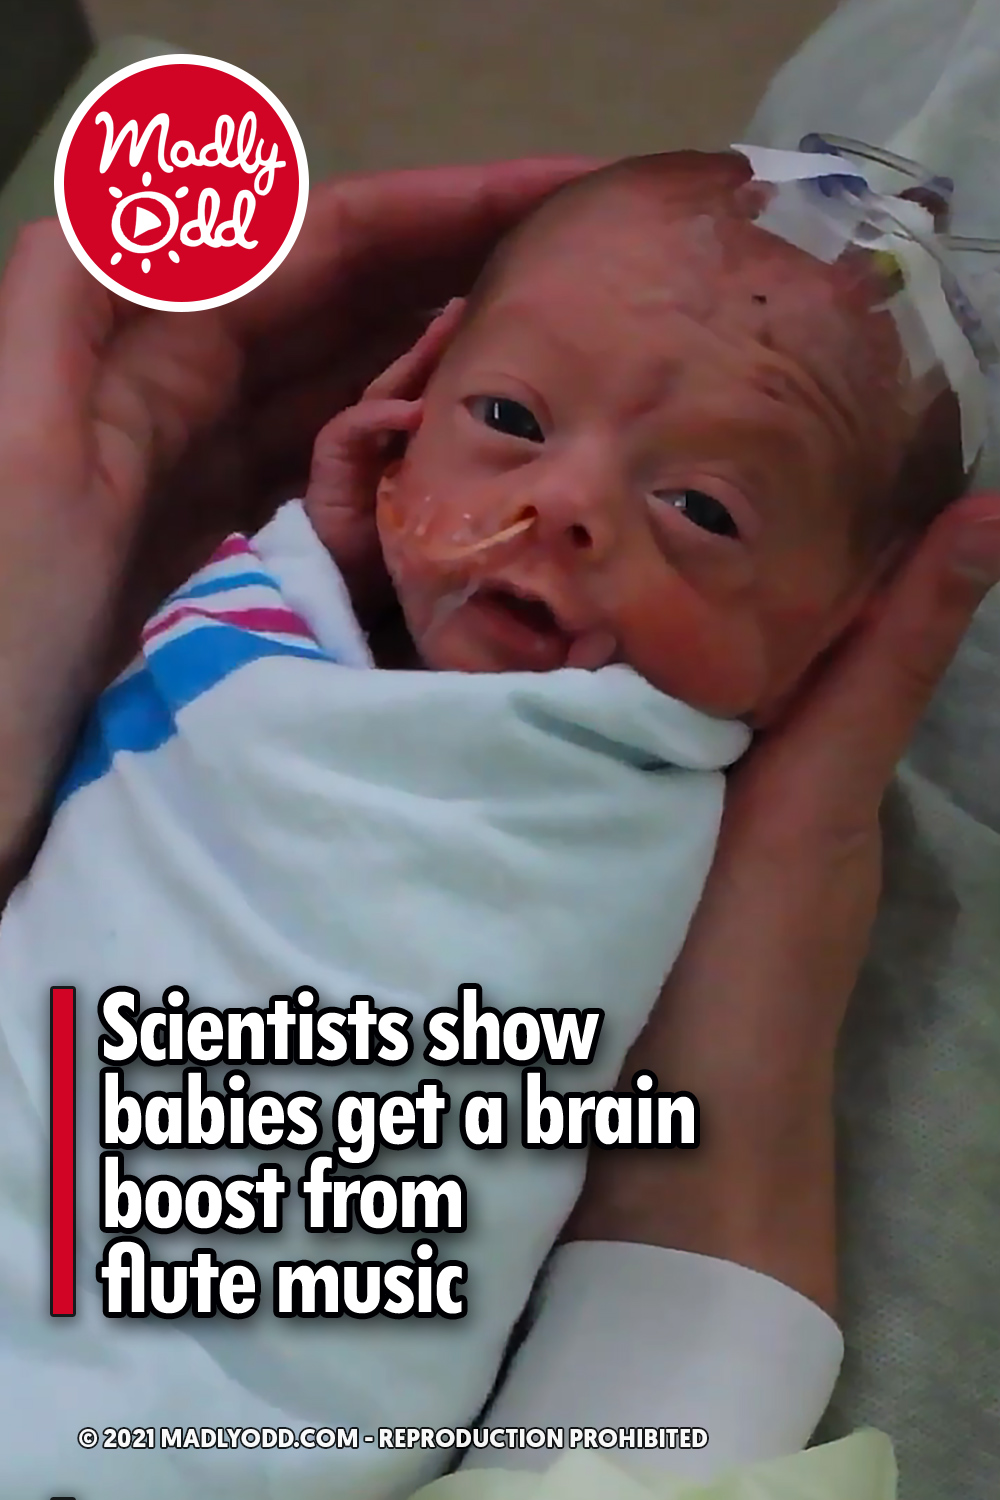 Scientists show babies get a brain boost from flute music